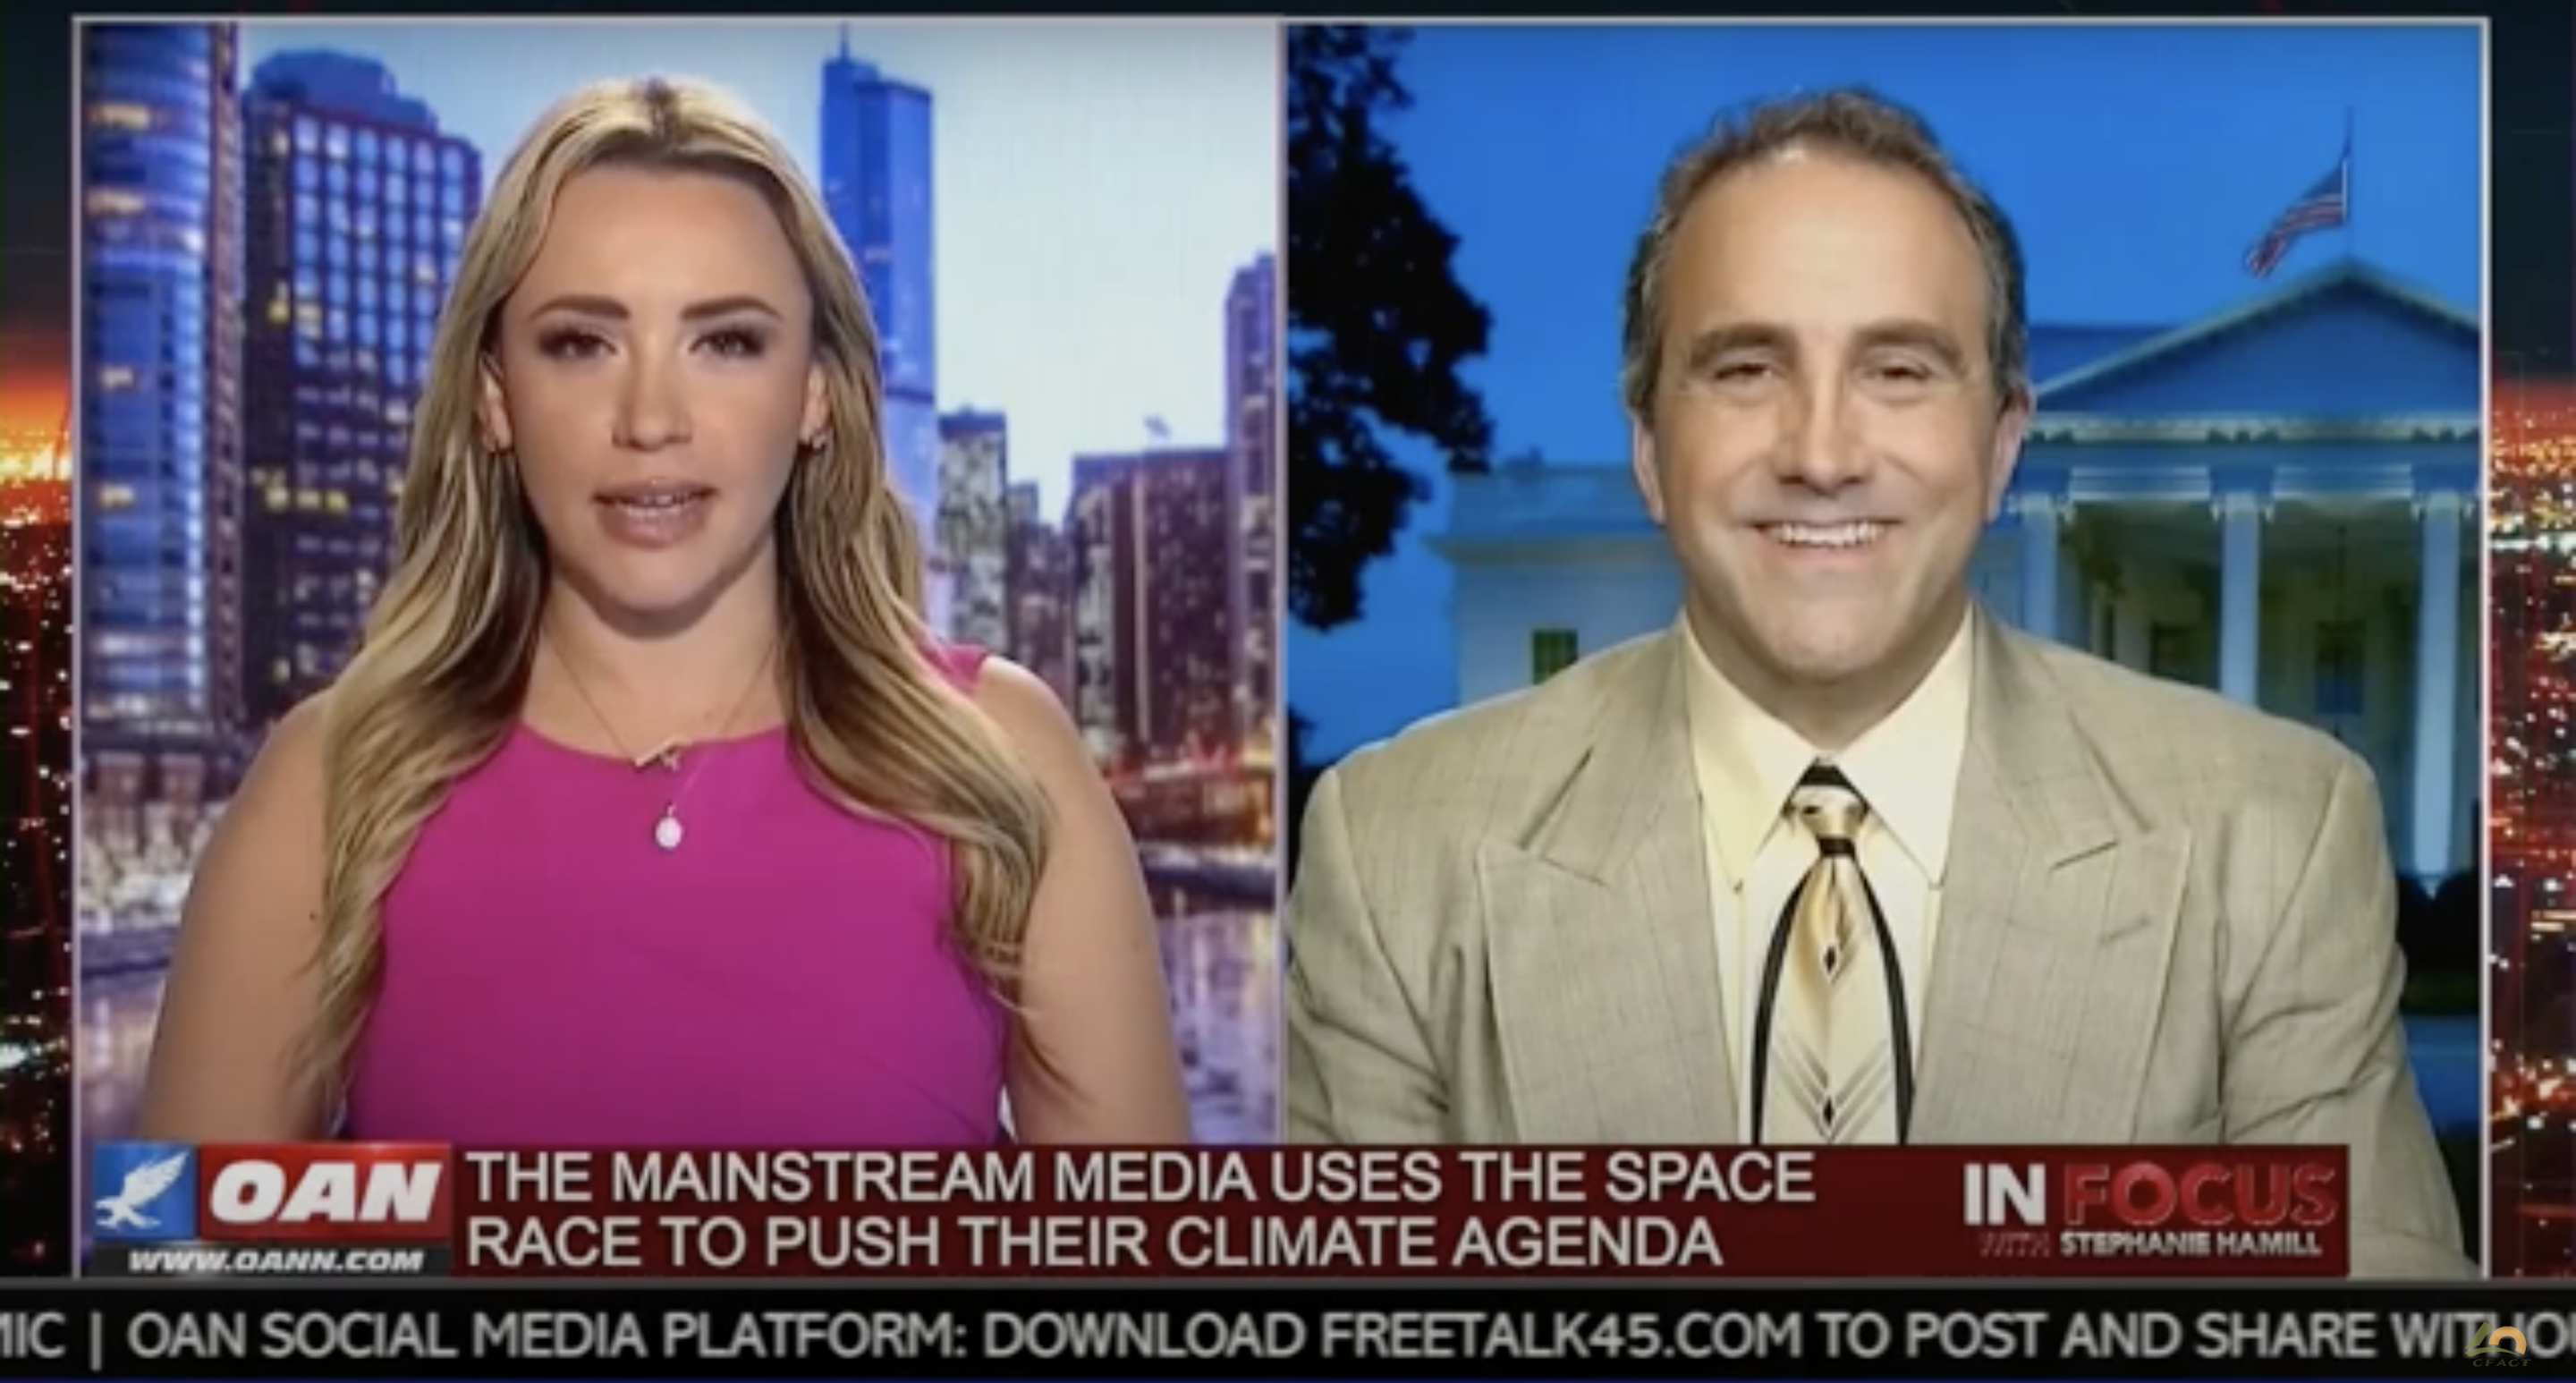 Morano on One America News: Climate is "seance science"